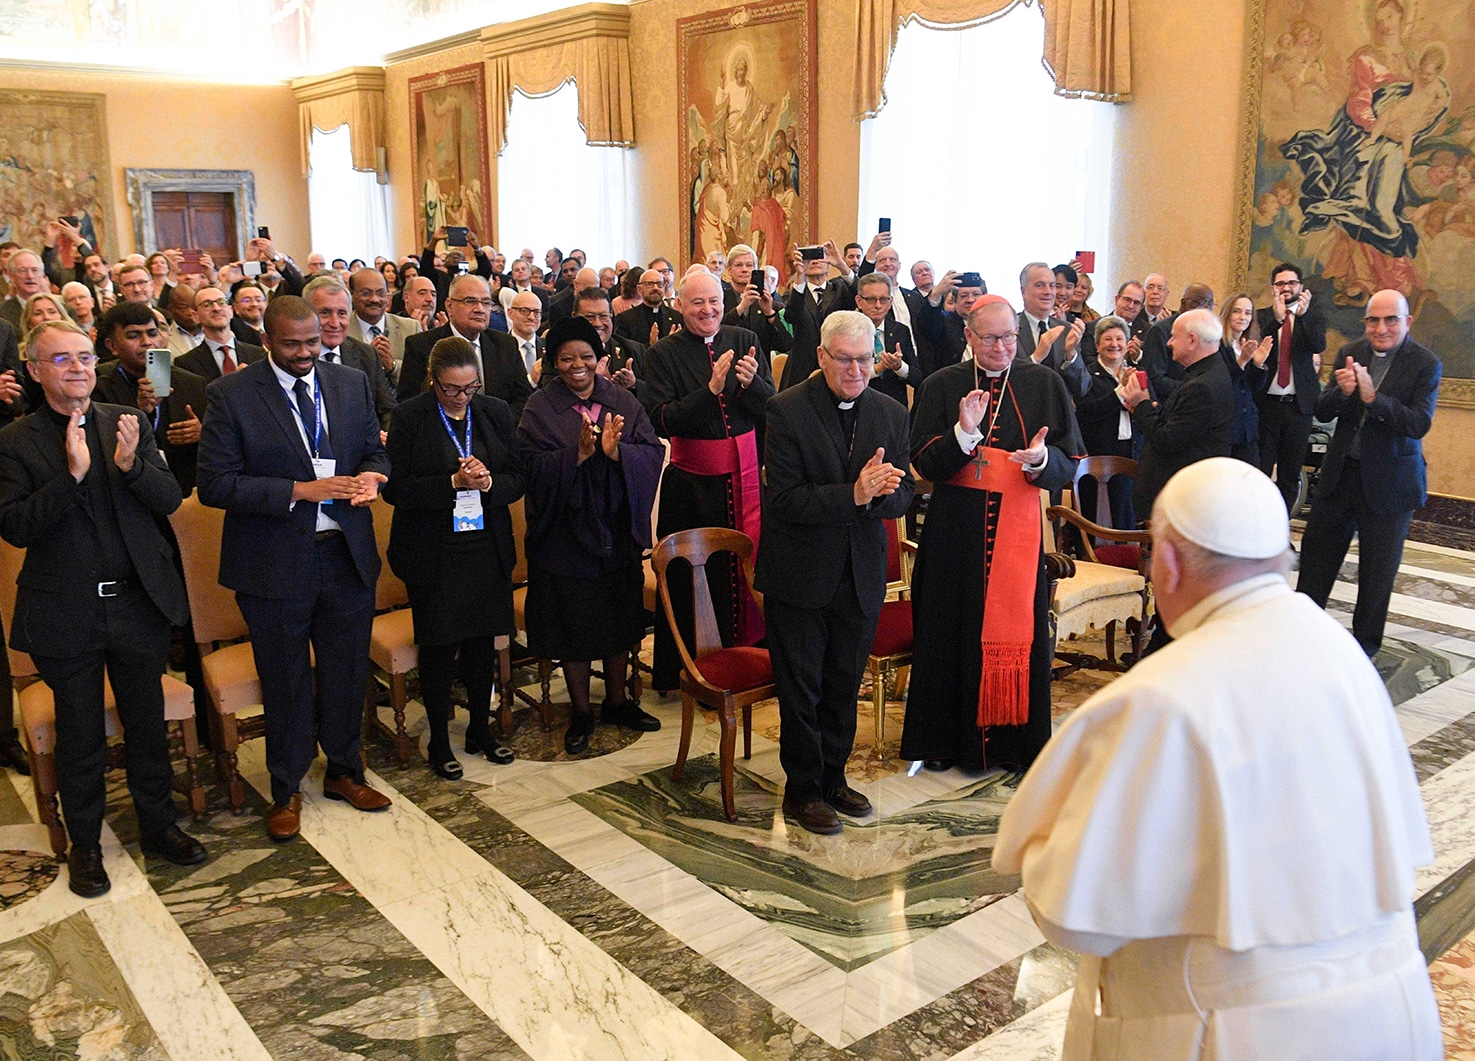 POPE FRANCIS AND PONTIFICAL ACADEMY FOR LIFE